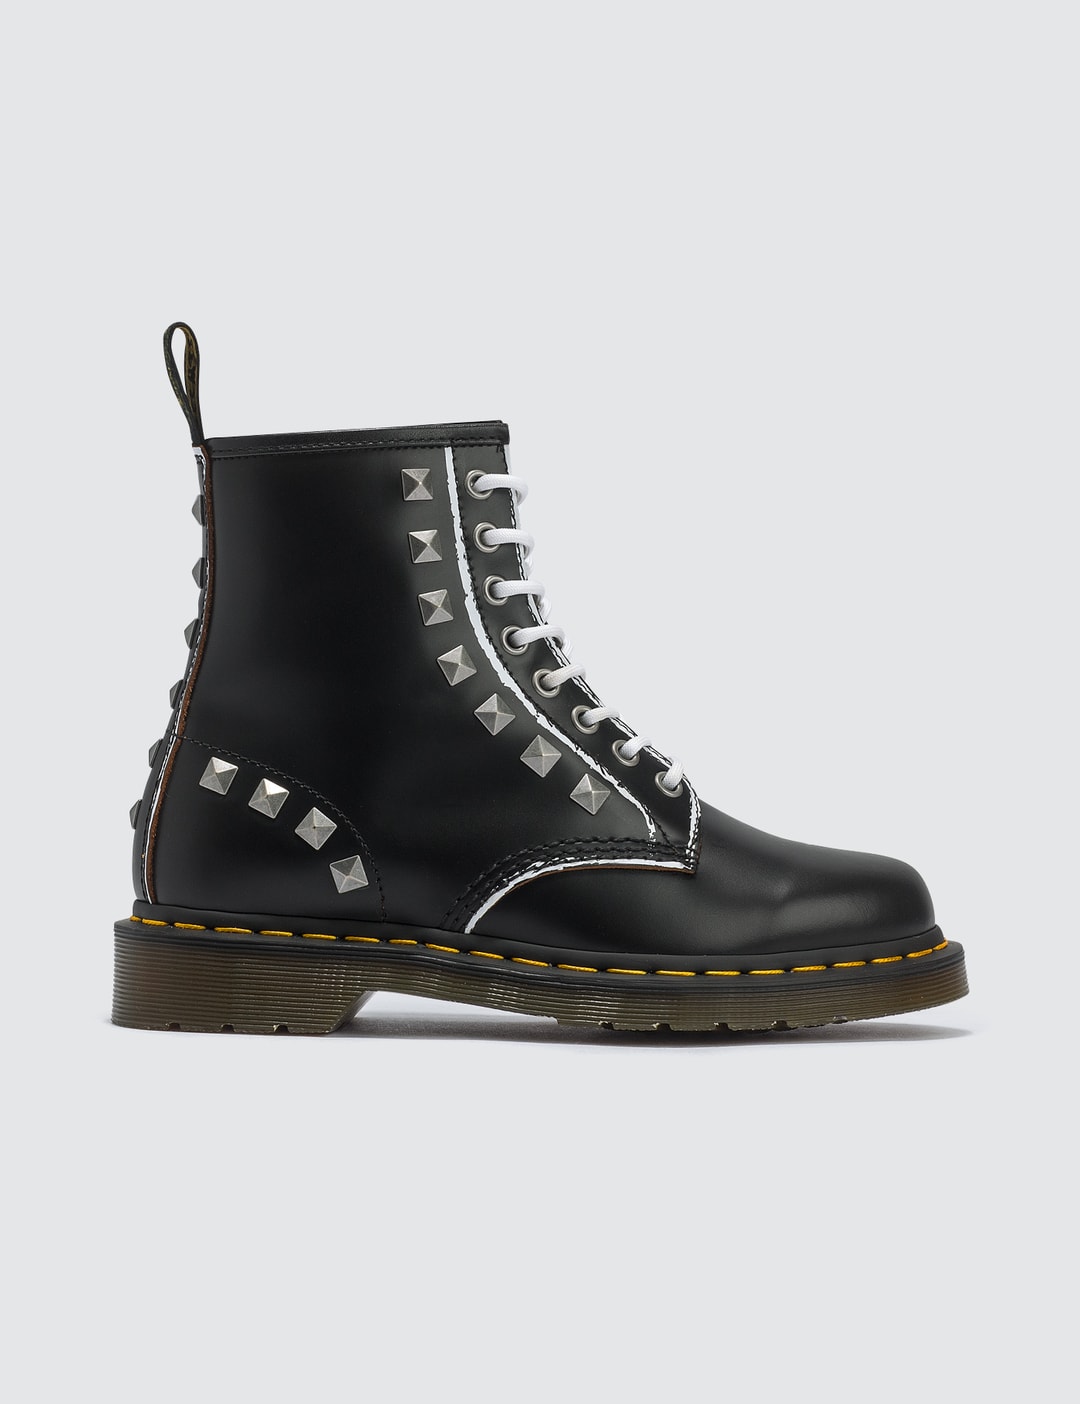 Dr. Martens - 1460 Stud | HBX - Globally Curated Fashion and Lifestyle ...